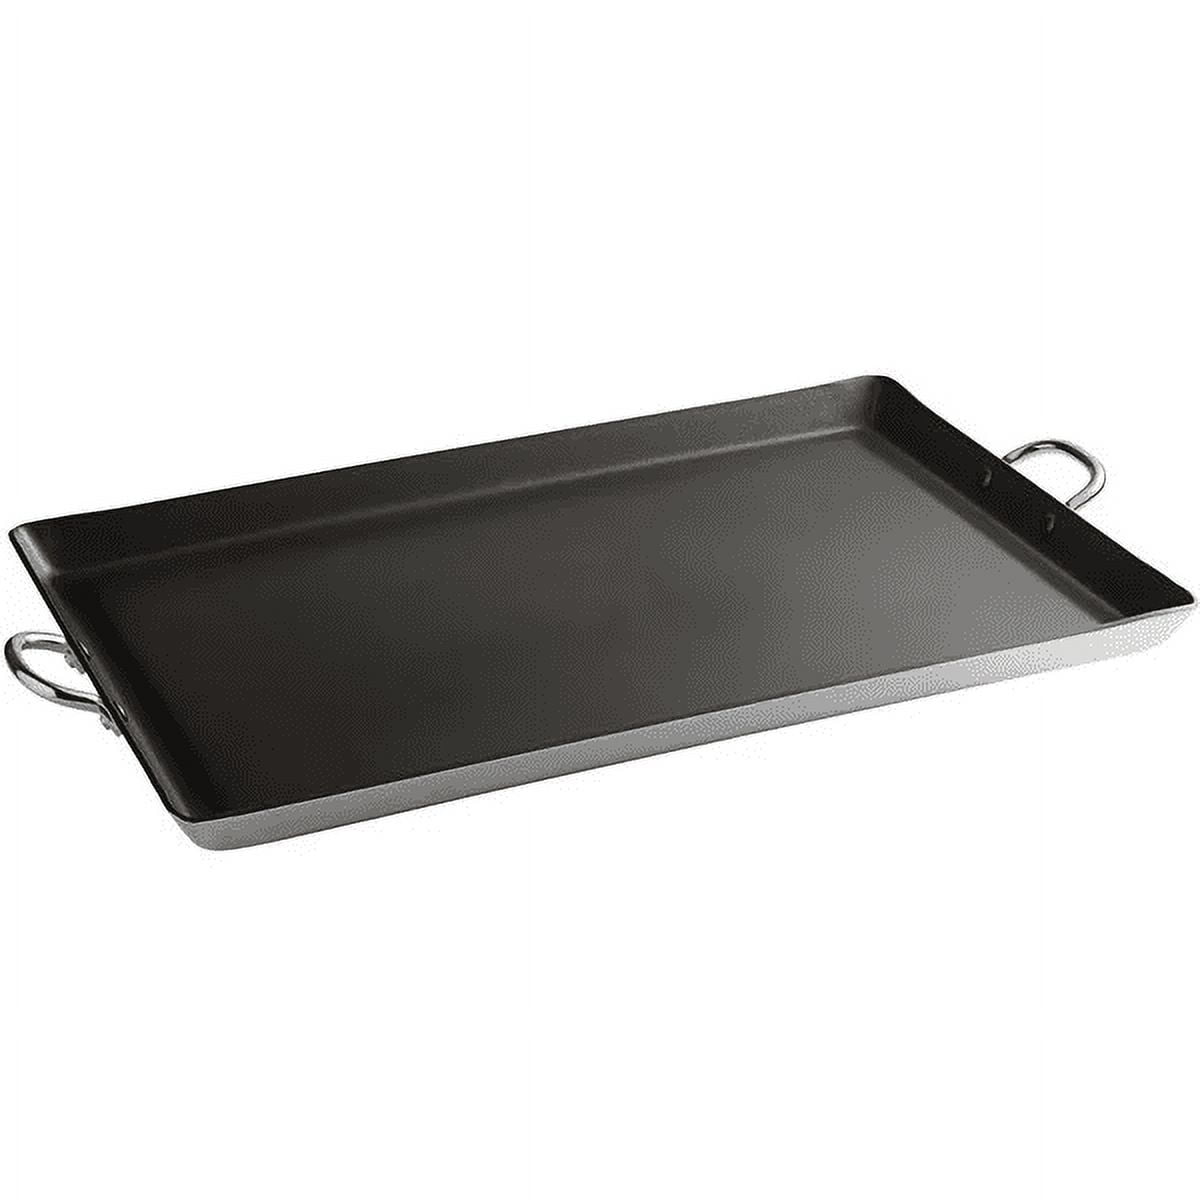 Non-Stick Fry Griddle - Flat Top Griddle Pan Stove Top Griddle with Handle  for Kitchen, Restaurant Pancake, Tortillas - 23 5/8 x 15 3/4 Black 